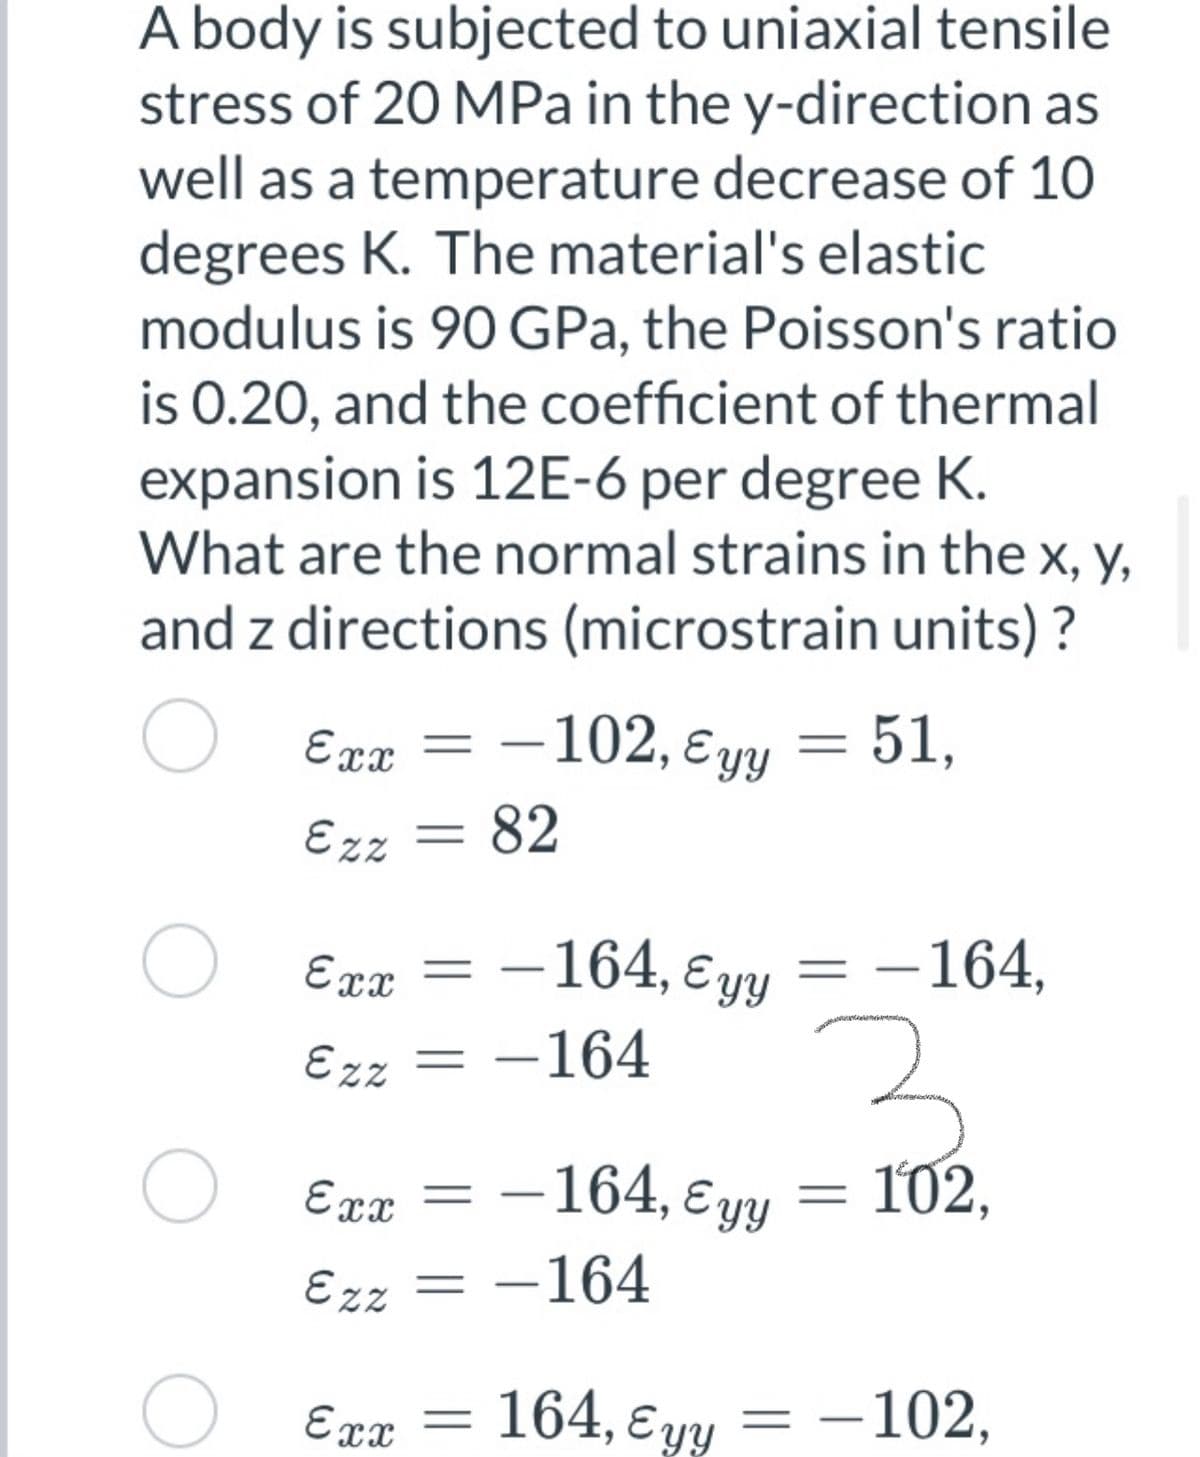 A body is subjected to uniaxial tensile
stress of 20 MPa in the y-direction as
well as a temperature decrease of 10
degrees K. The material's elastic
modulus is 90 GPa, the Poisson's ratio
is 0.20, and the coefficient of thermal
expansion is 12E-6 per degree K.
What are the normal strains in the x, y,
and z directions (microstrain units) ?
Exx
–102, ɛyy = 51,
Ezz
82
-164, ɛ yy
-164,
Exx
%3D
Ezz
-164
-164, E yy
102,
Exx =
Ezz = -164
164, E yy
- -102,
Exx
